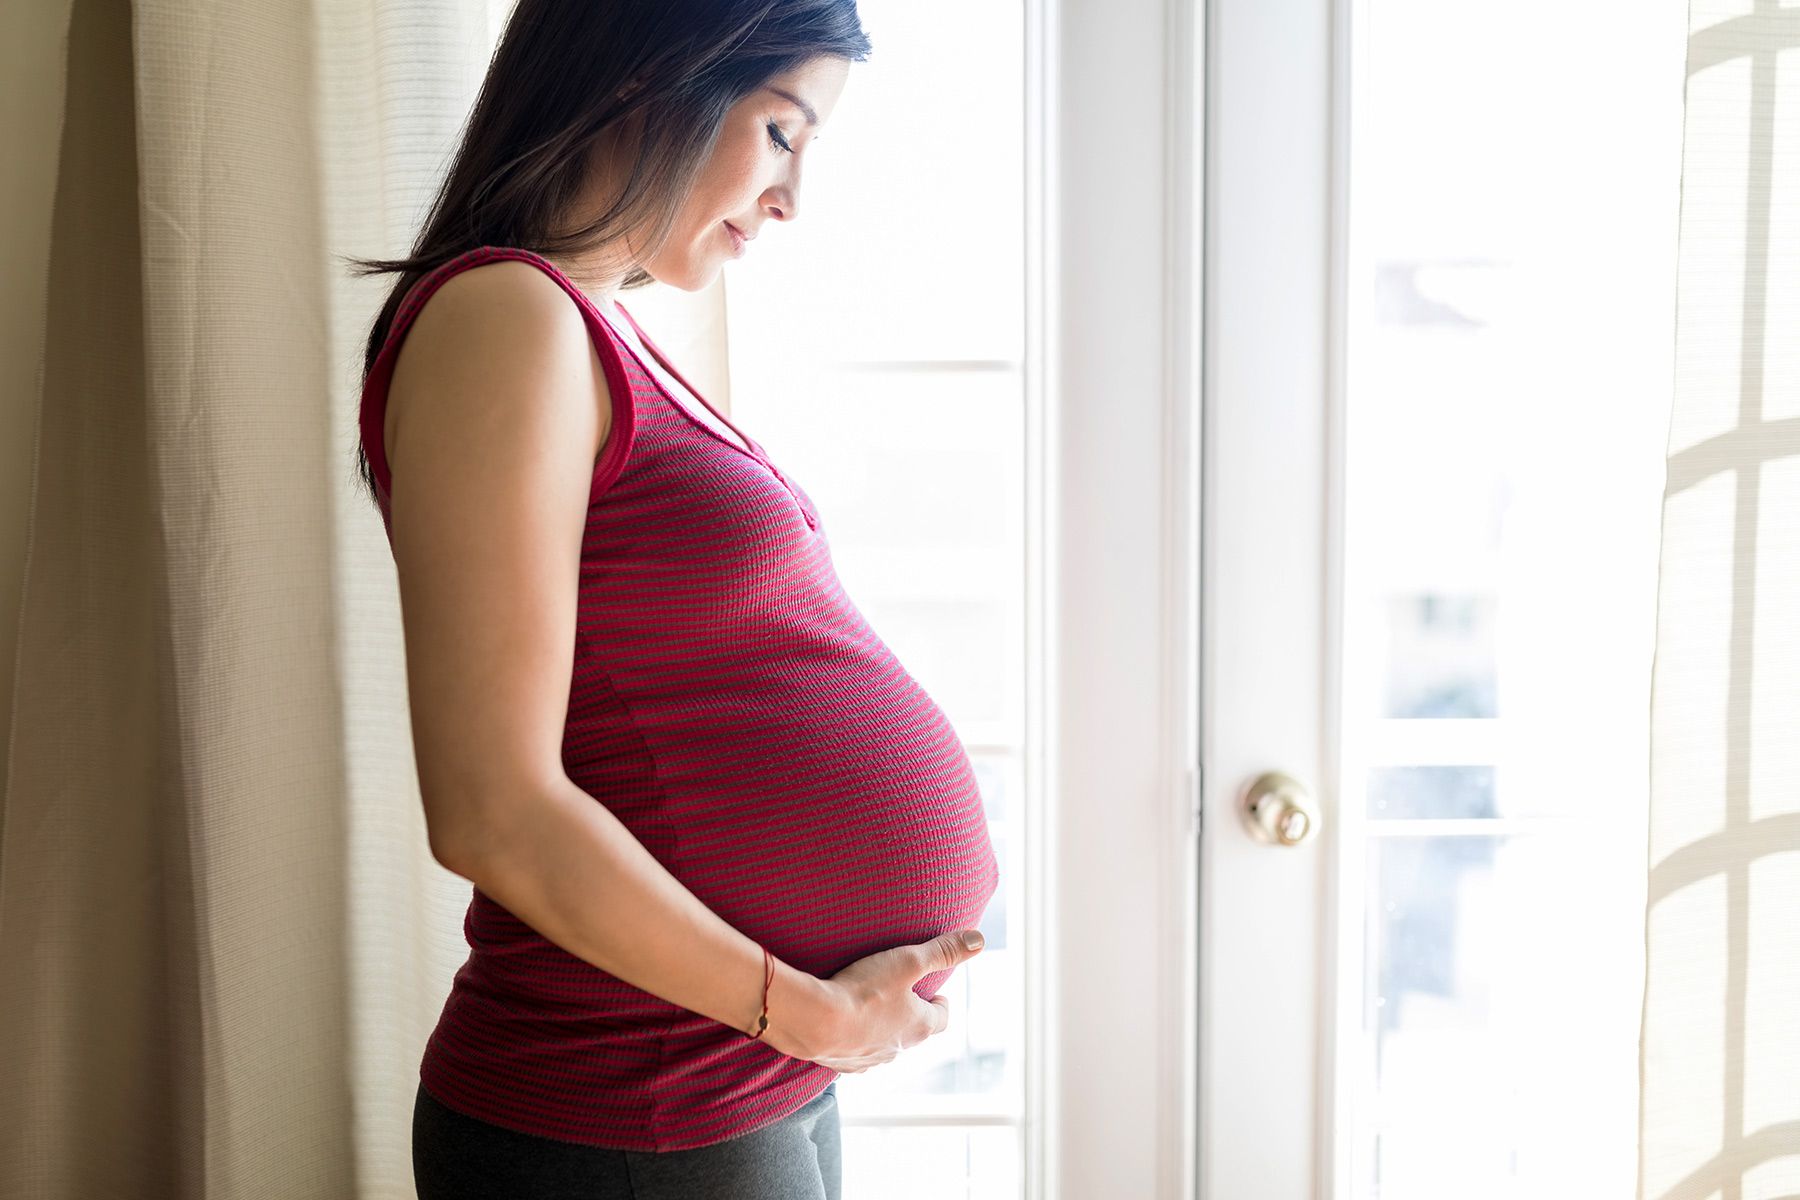 A Brief Outline On How Pregnancy Affects Health